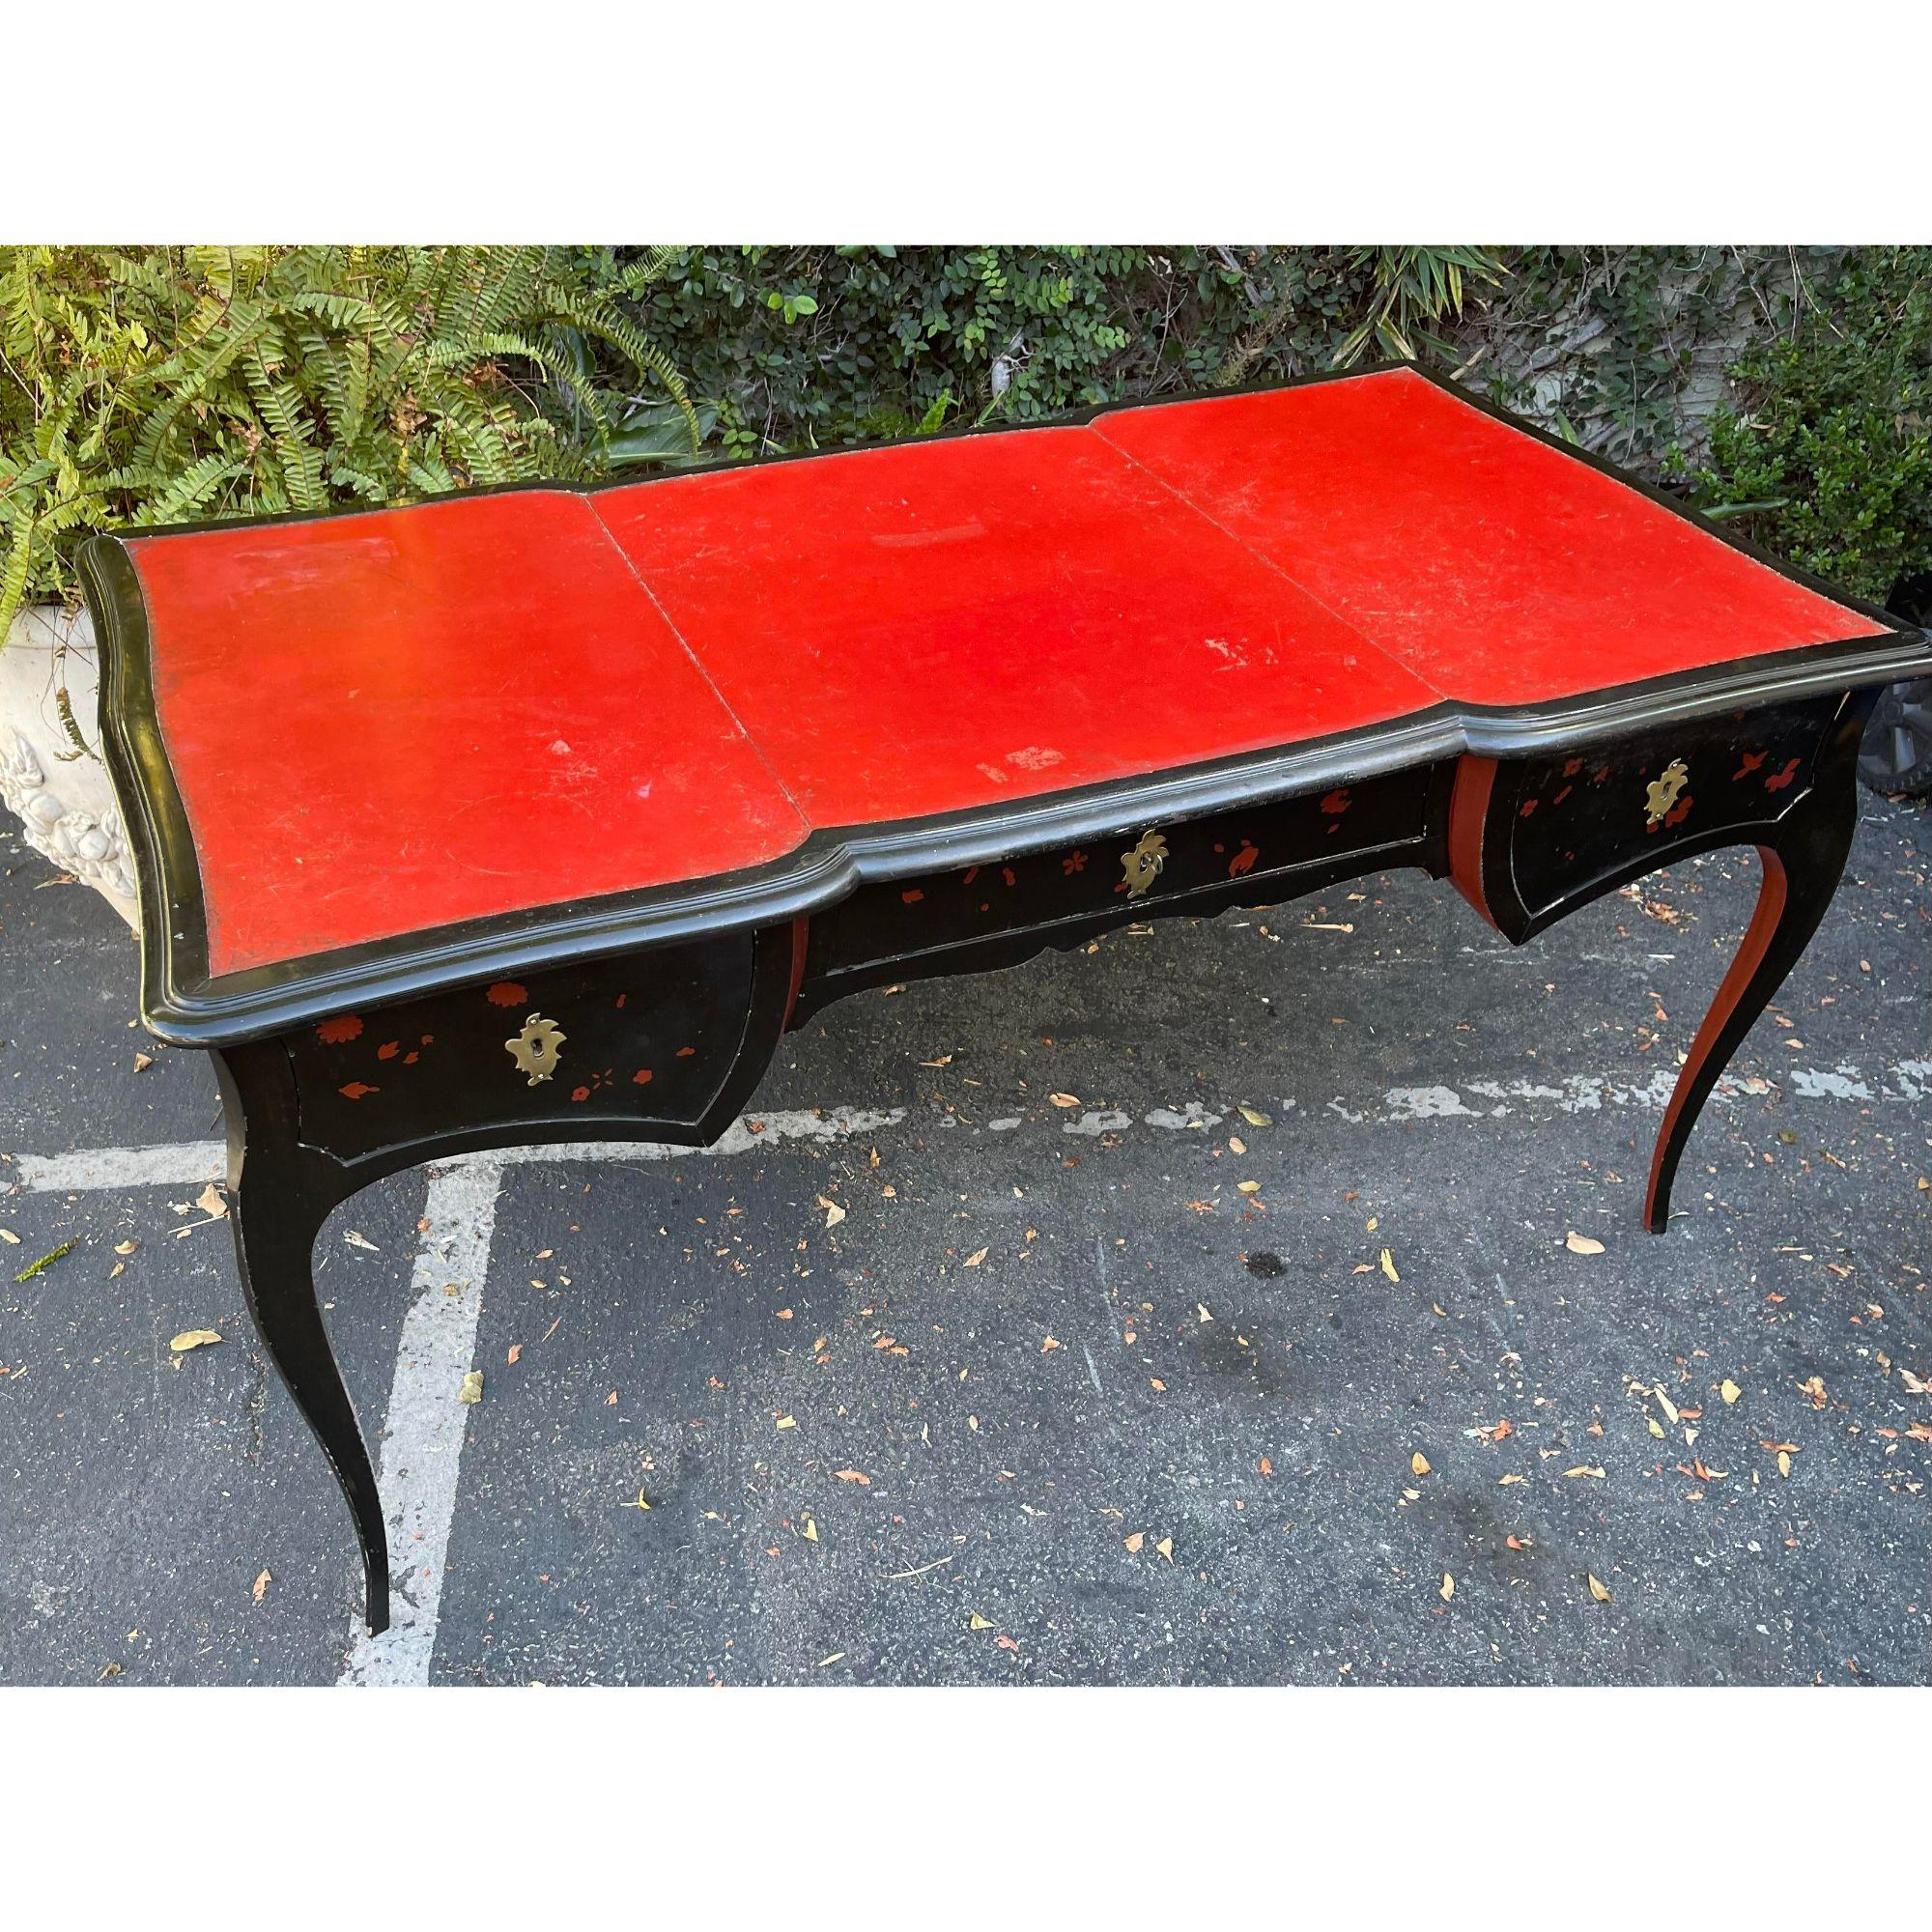 19th Century Antique Chinoiserie Black Lacquer Red Leather Bureau Plat Writing Table Desk For Sale